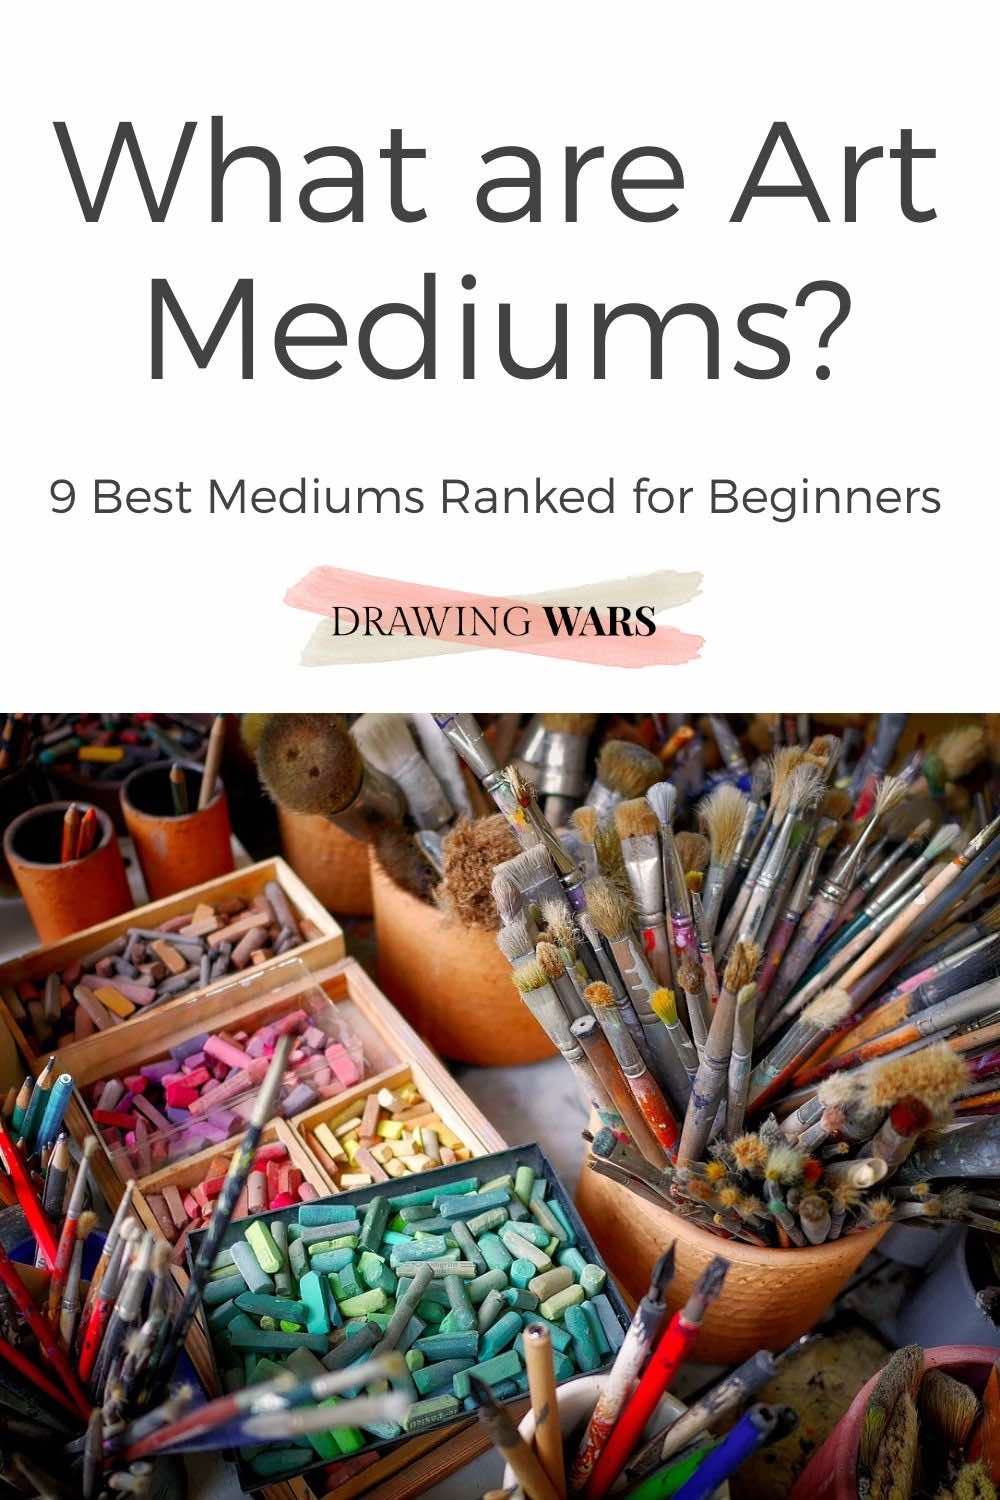 What are Art Mediums? 9 Best Mediums Ranked for Beginners